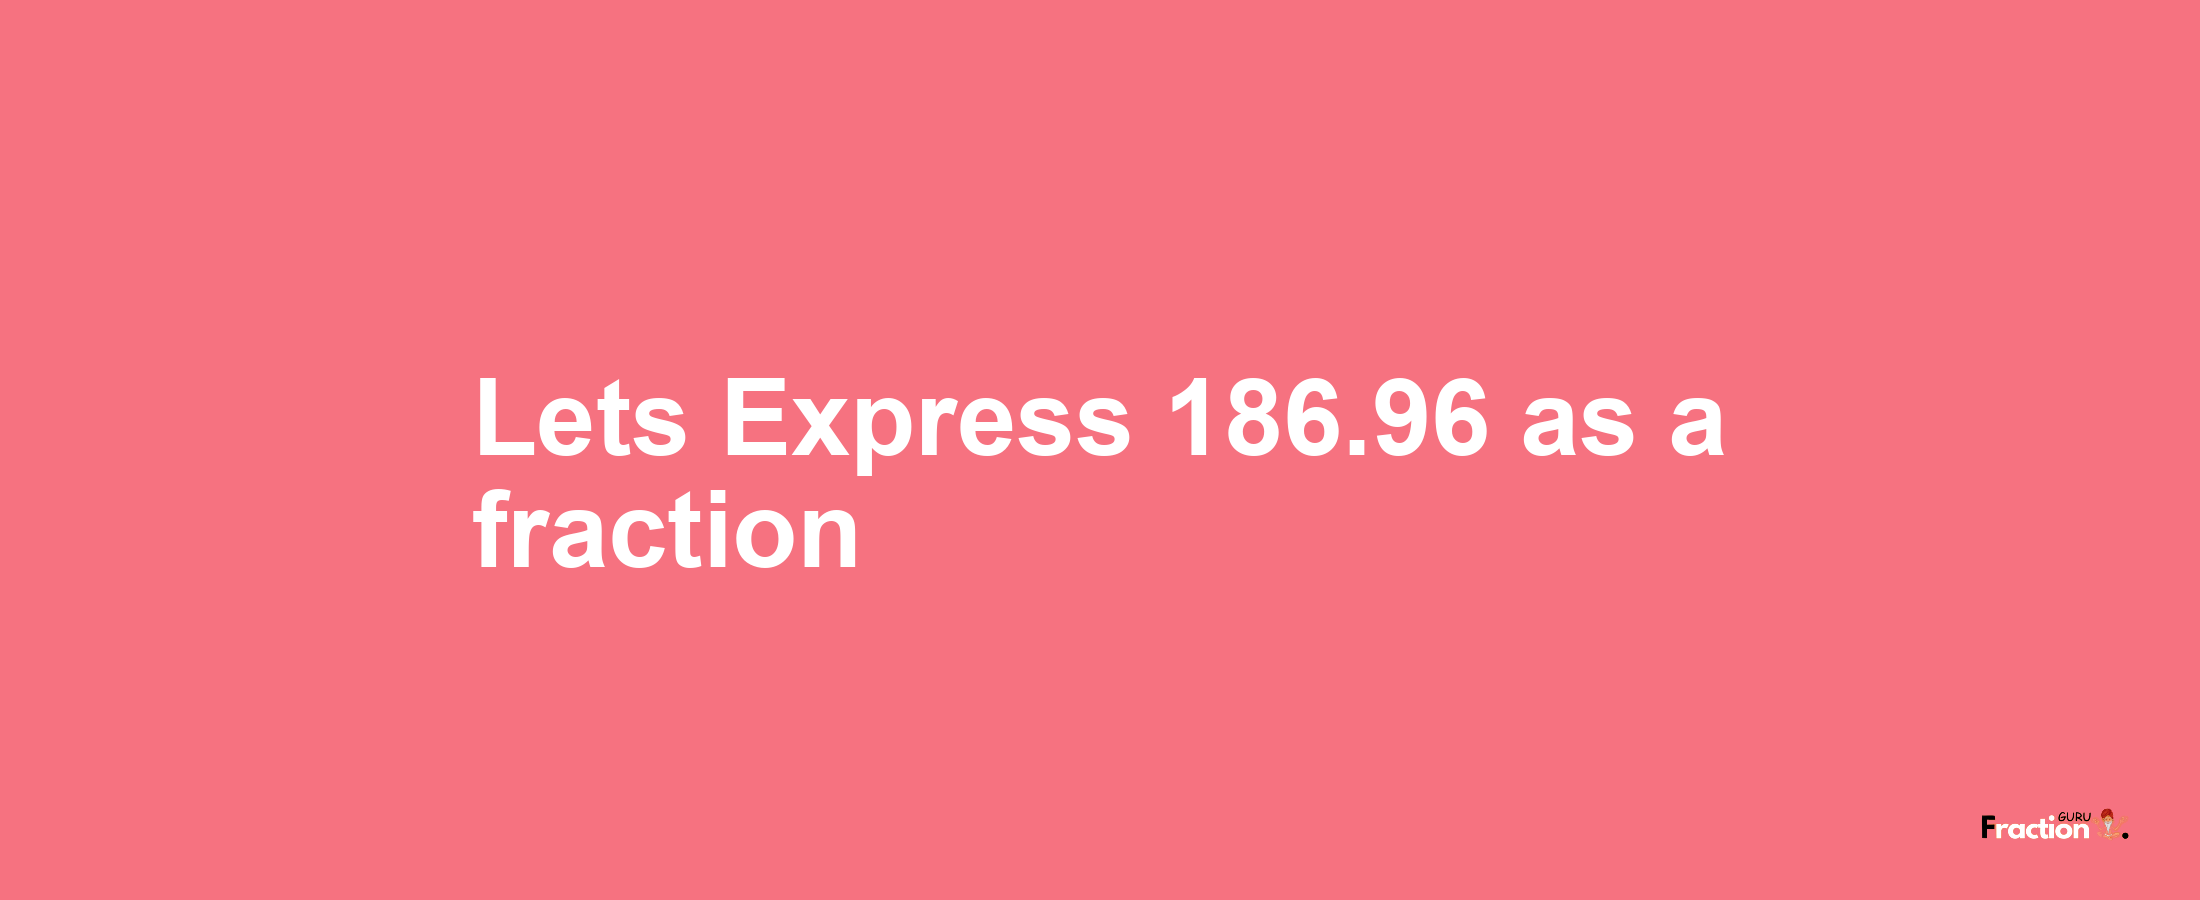 Lets Express 186.96 as afraction